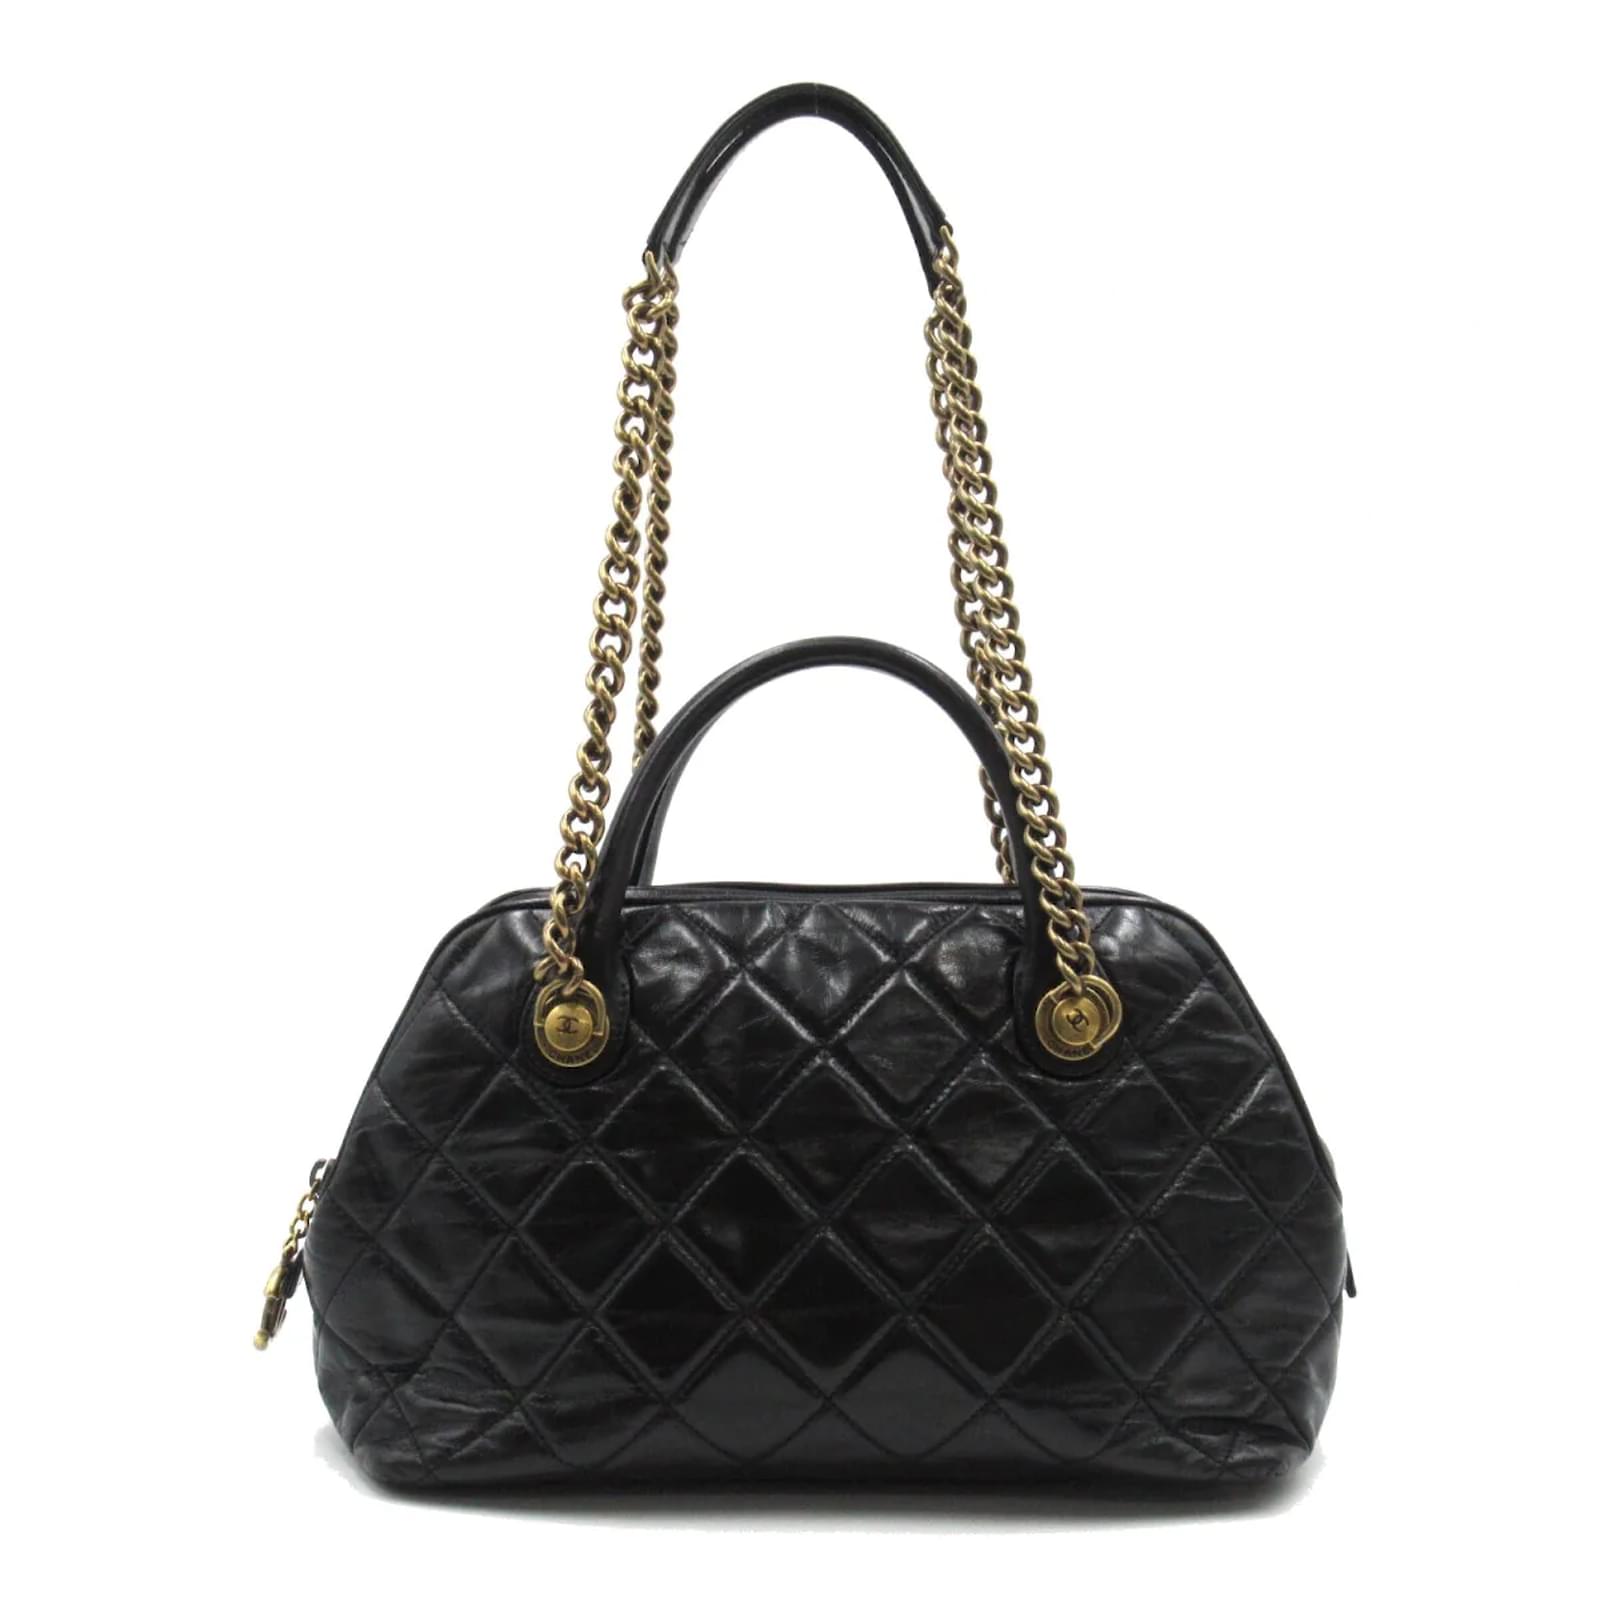 Buy CHANEL BOWLING BAG Black Quilted Grained Leather Authenticity Online in  India 